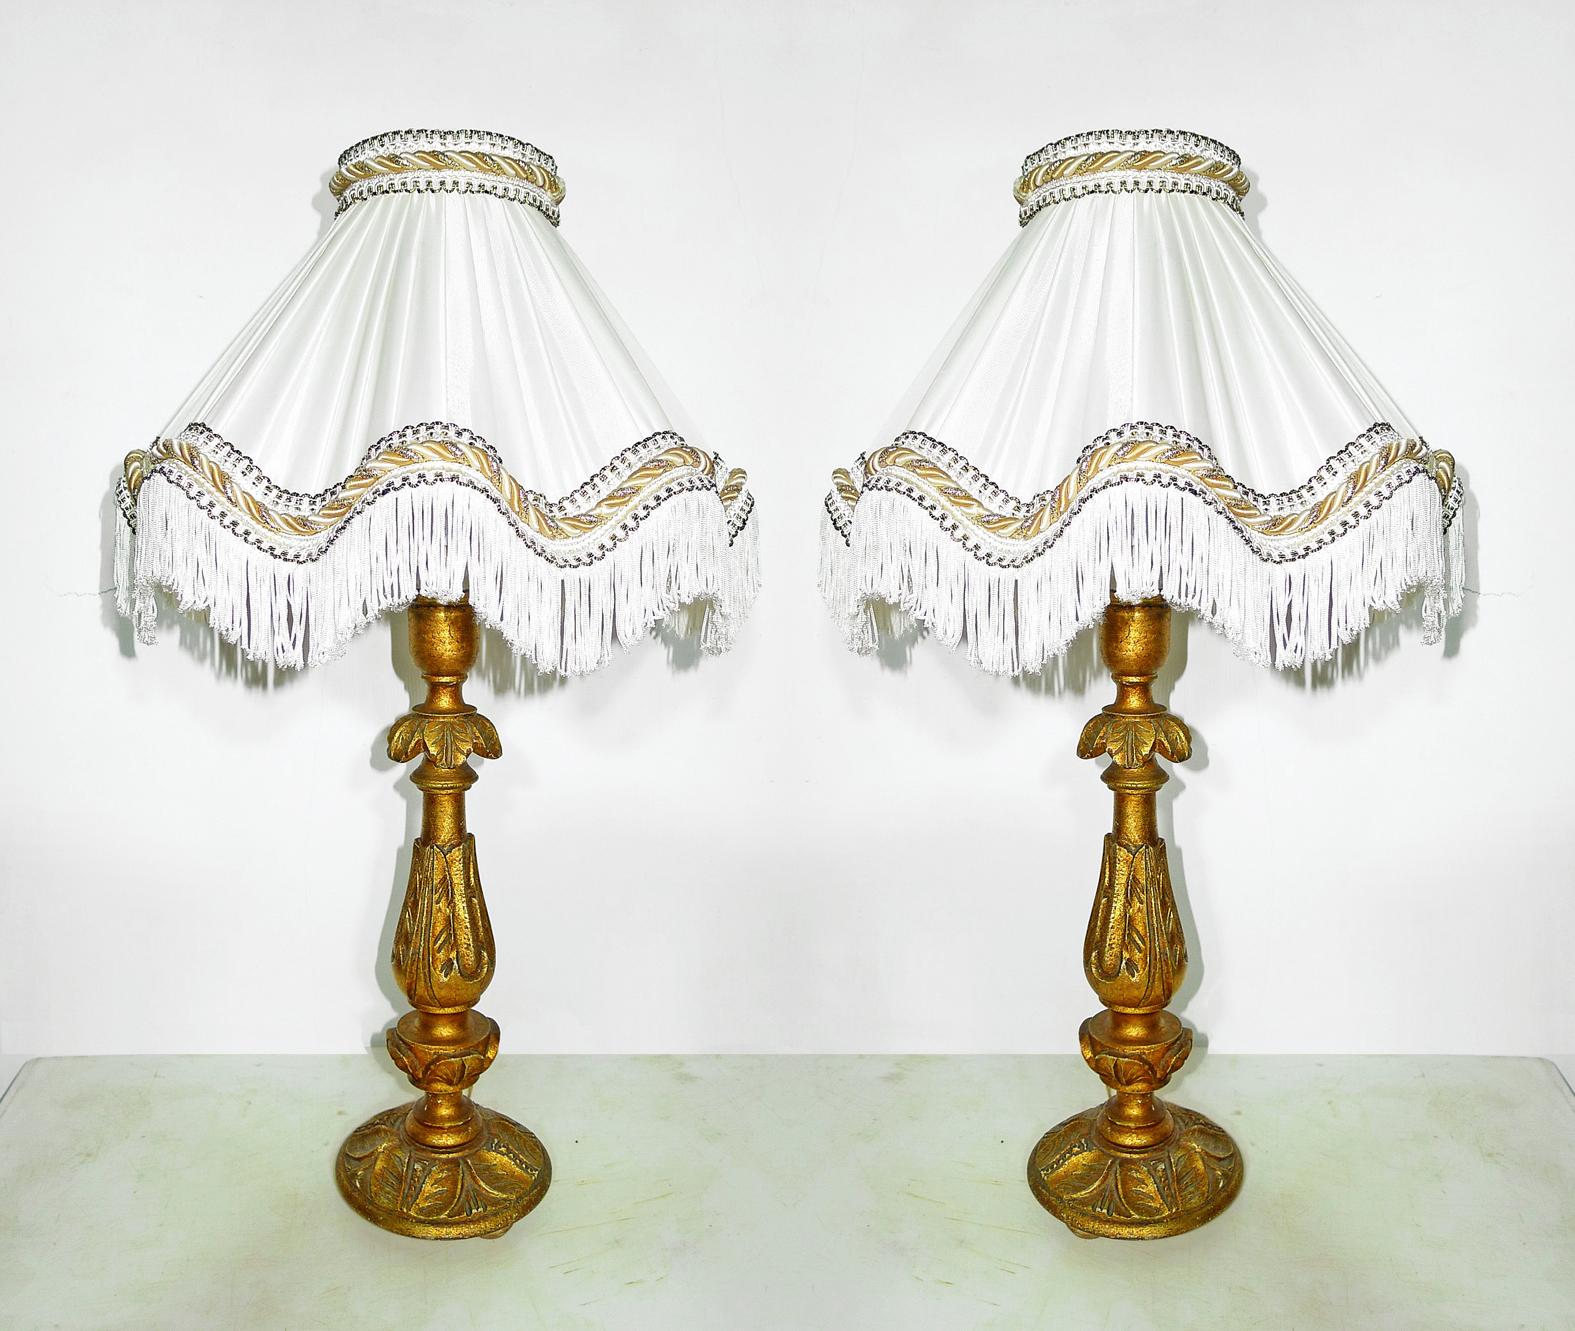 Pair of elegant Italian Baroque carved giltwood candlesticks torchères turned into table lamps with ivory silk lampshades
Measures:
Height: 24 in /60 cm
Diameter: 14 in /36 cm
Weight: 5 lb. /2,5 kg
Housing one light bulb each ( E14 )
Good